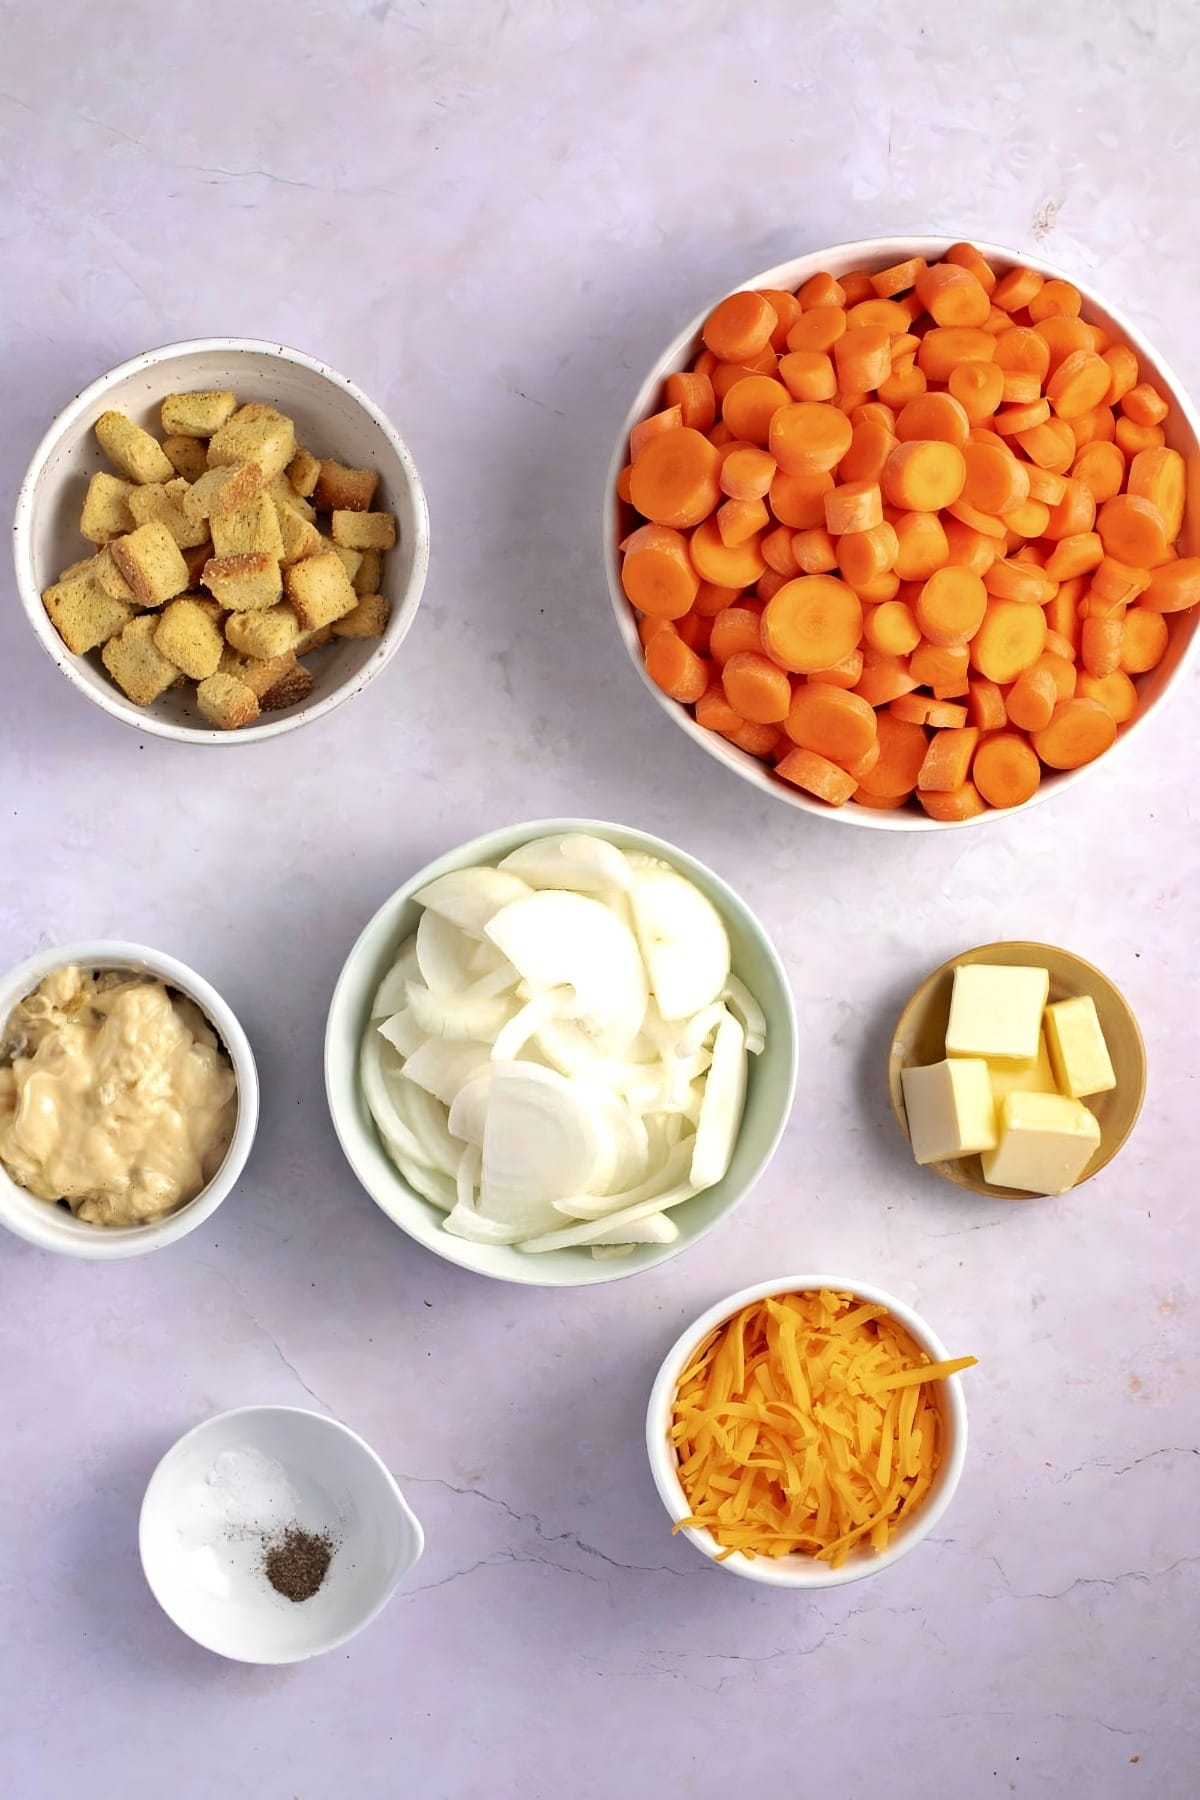 Carrot Casserole Ingredients - Carrots, Onions, Butter, Salt, Pepper and Cheddar Cheese
